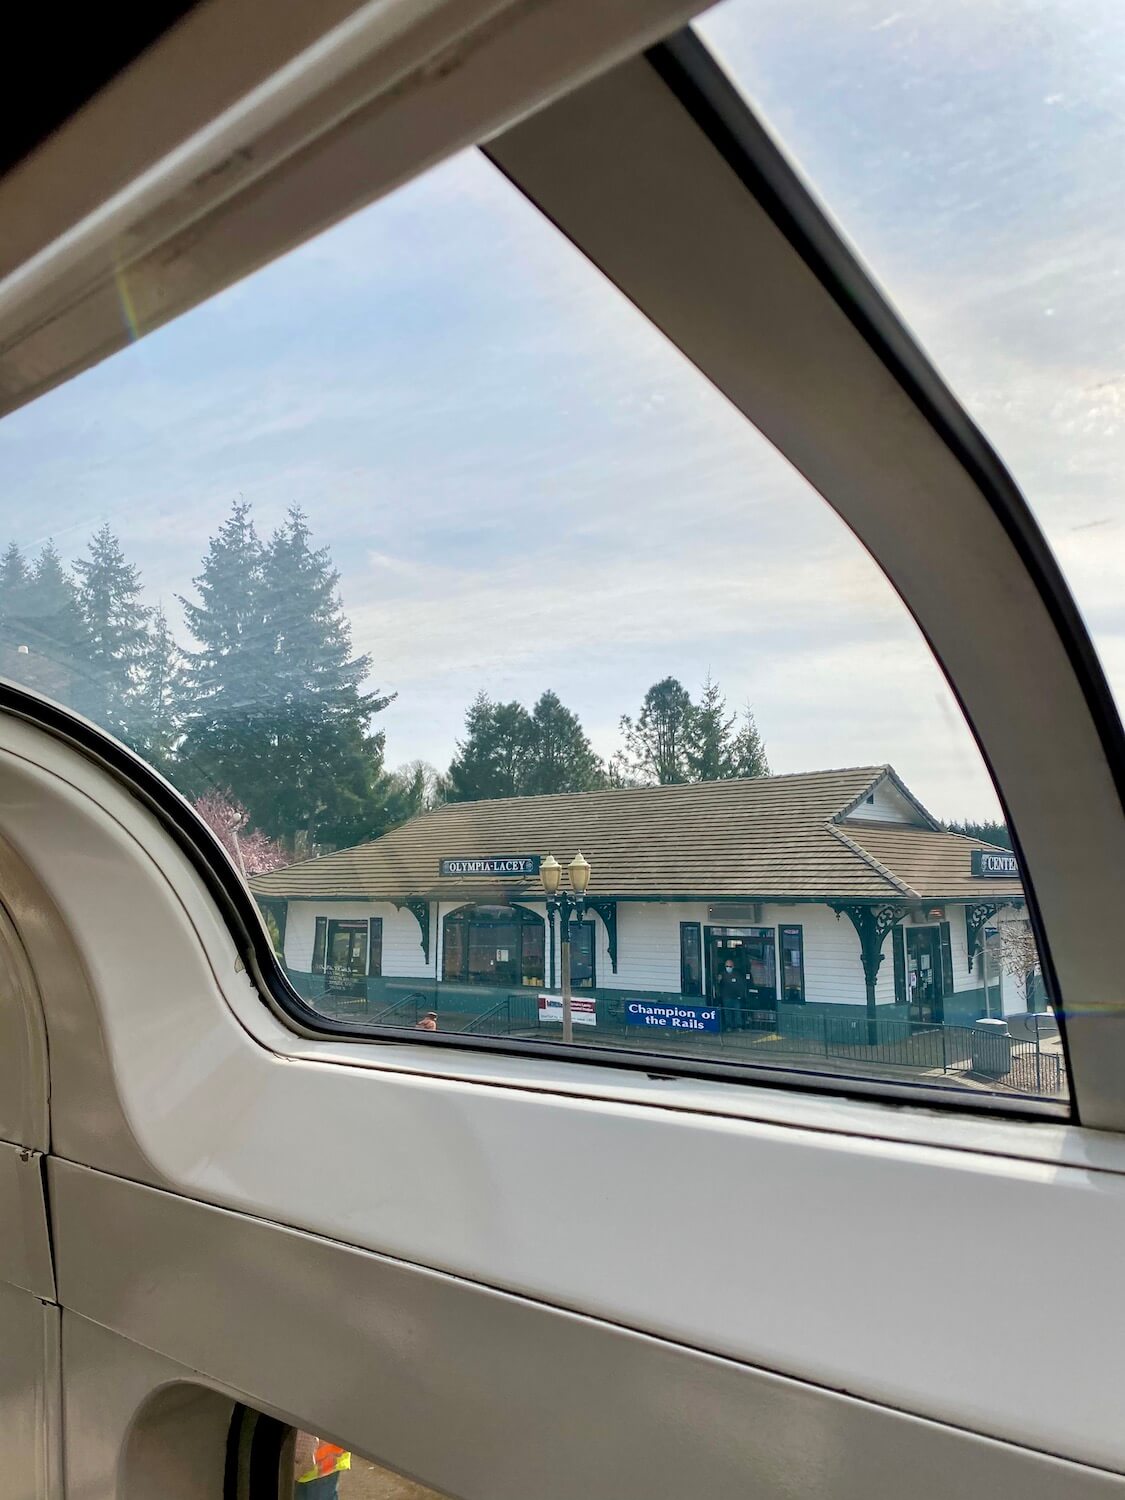 The Coast Starlight stops at the Olympia/Lacey station which can be seen outside the curved window of the scenic dome car on the train. 